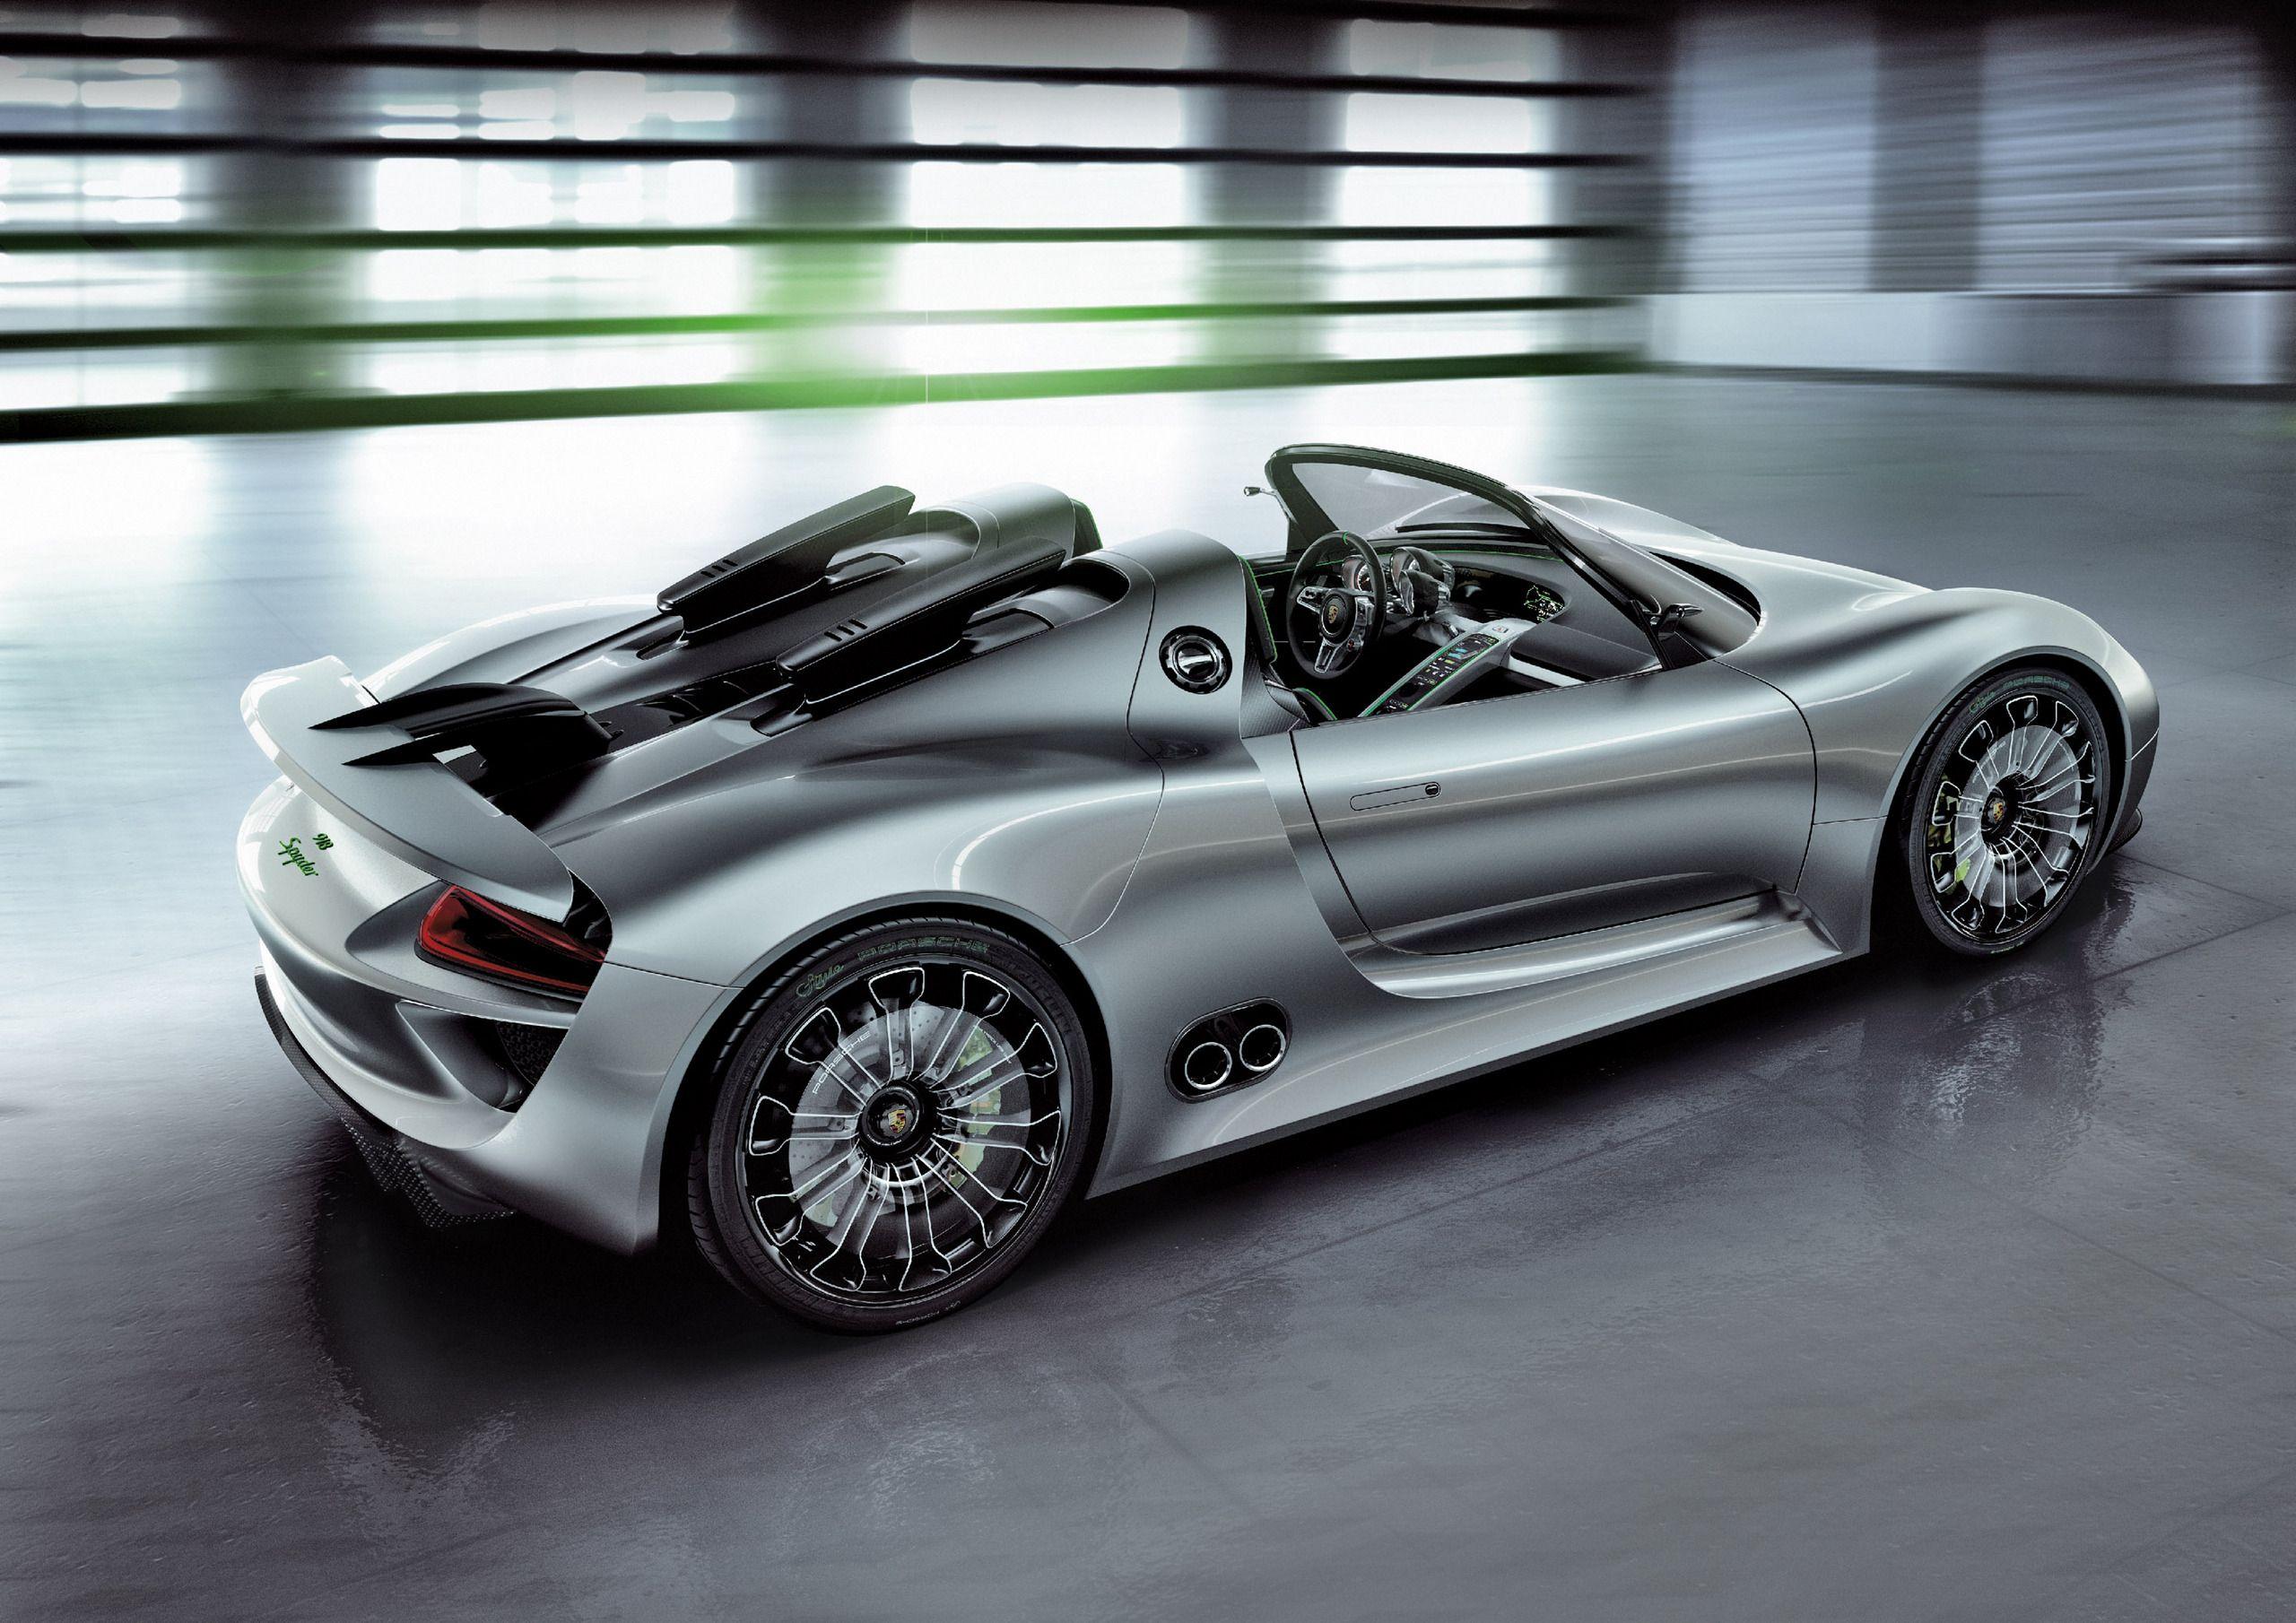 Exotic Cars image Porsche 918 Spyder HD wallpaper and background